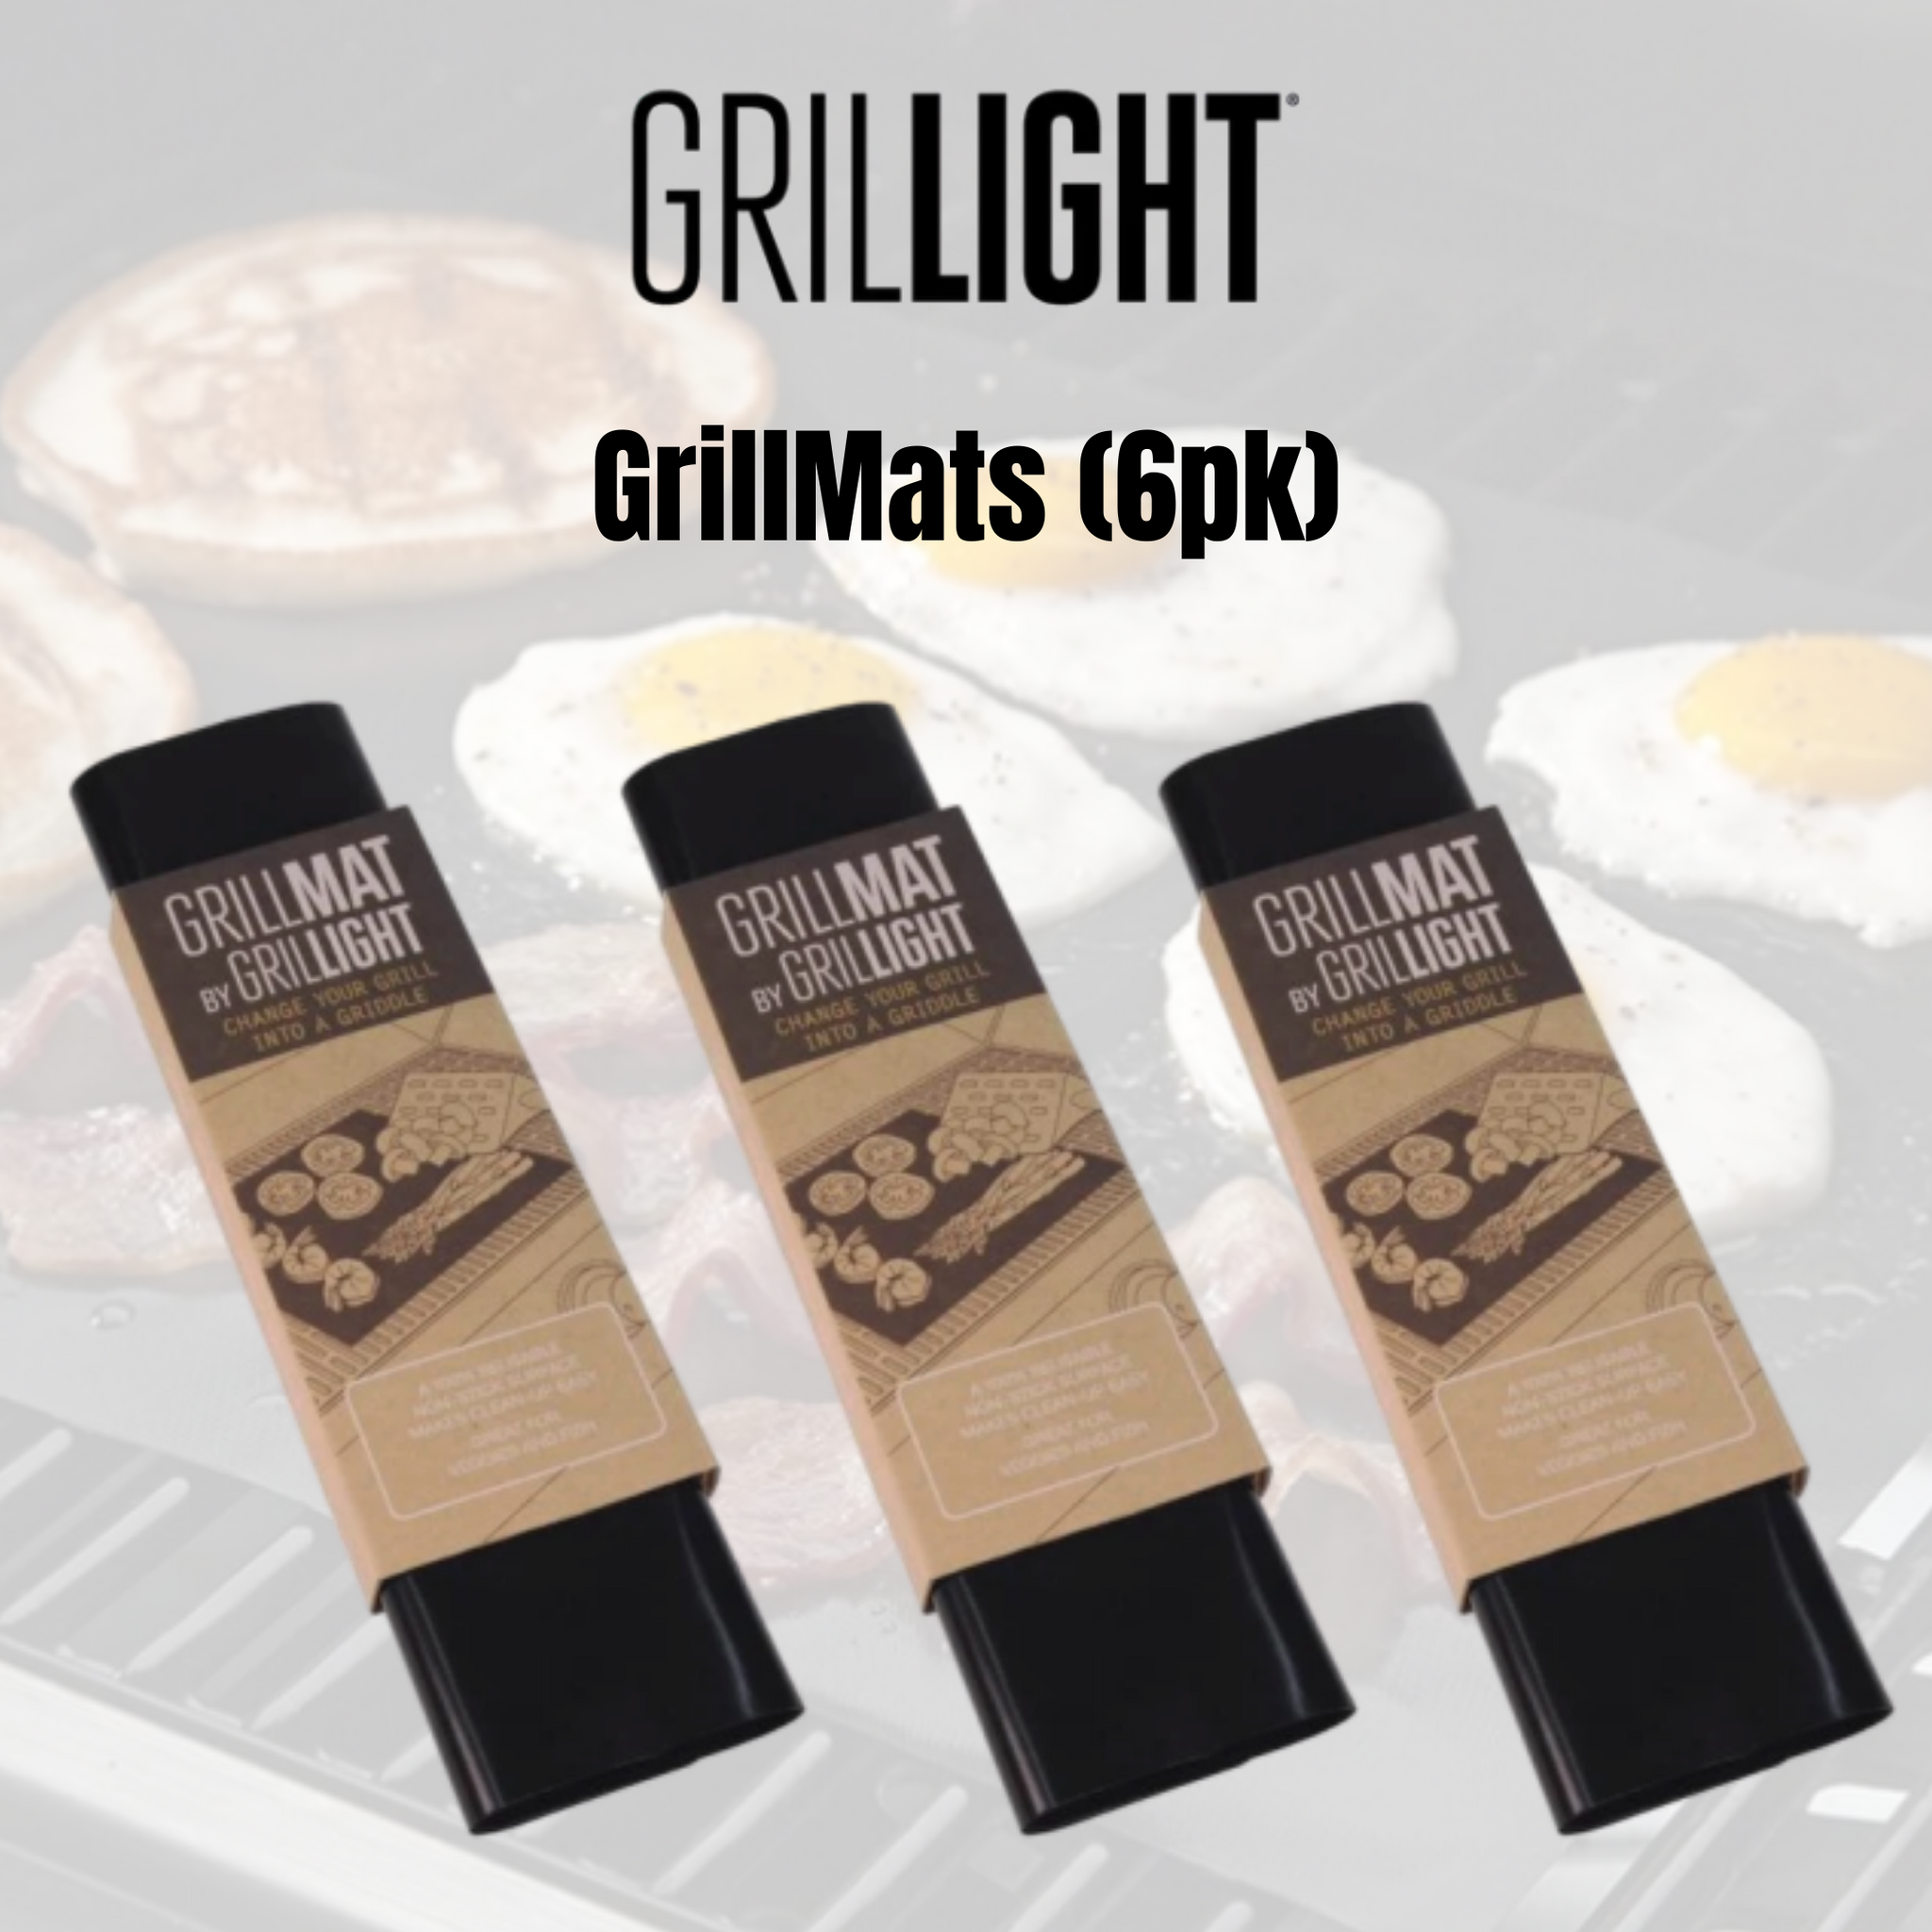 GrillMats by Grillight (6pk) by Grillight.com